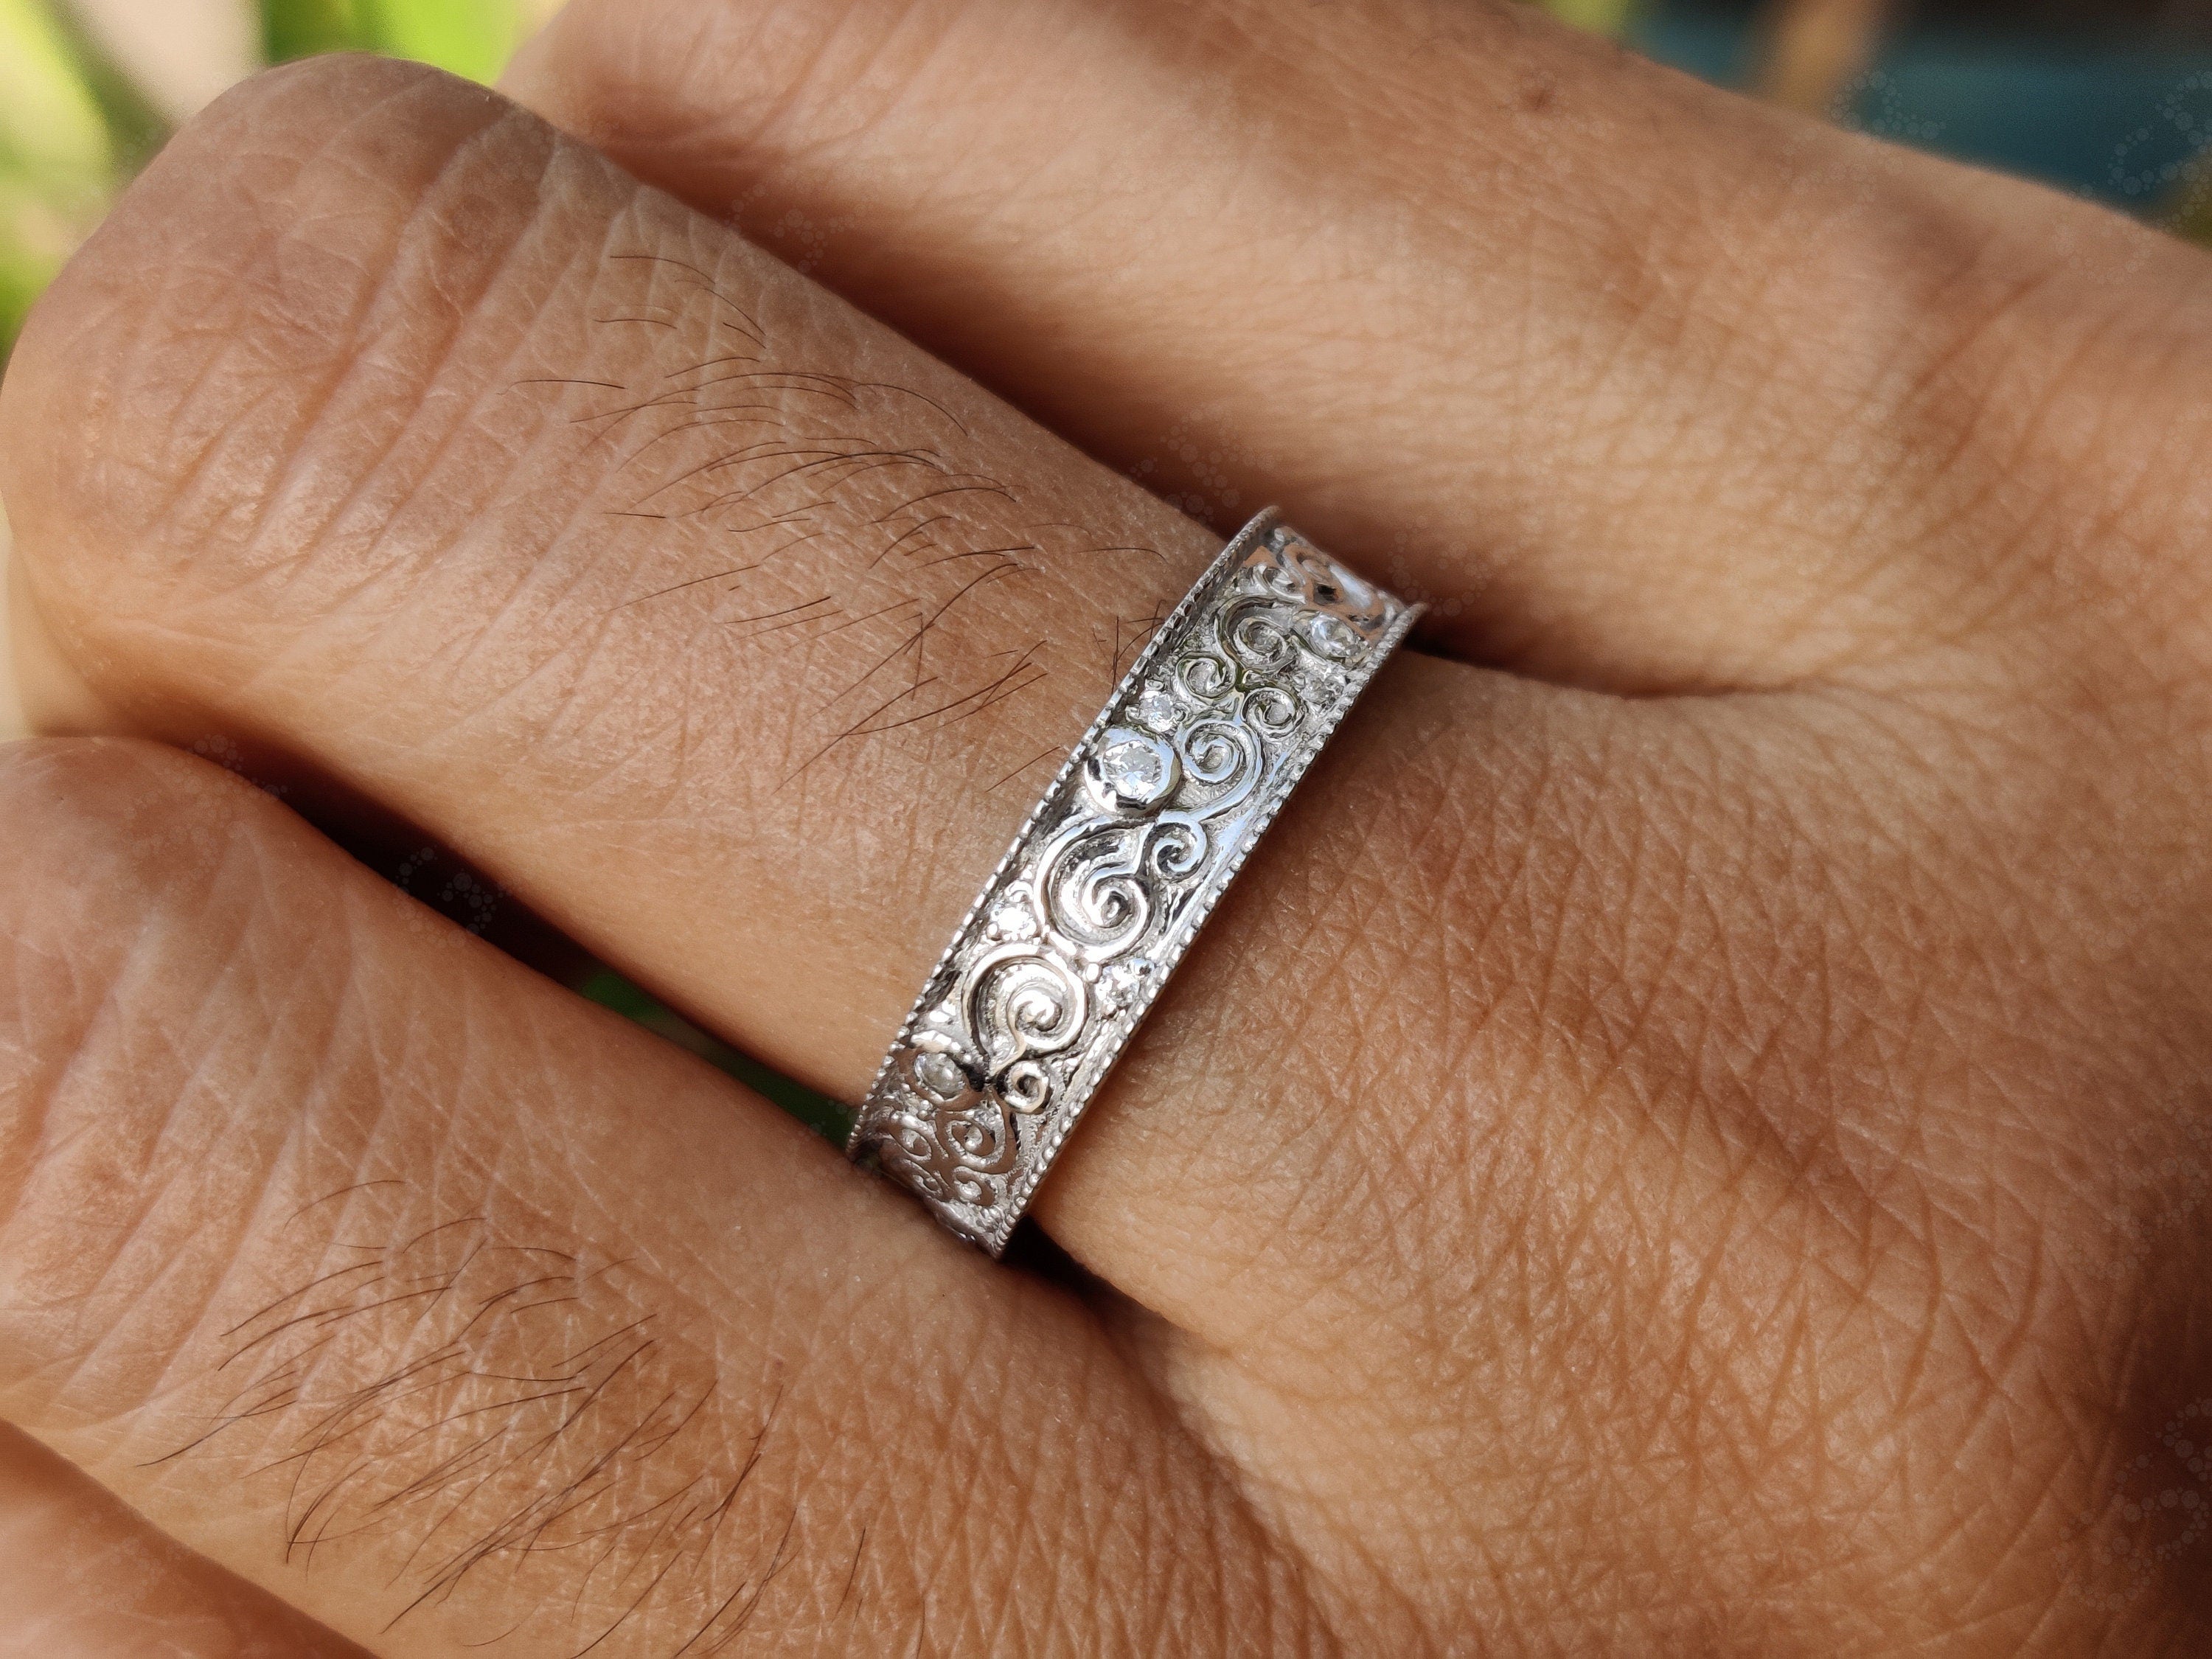 Vintage Full Eternity Floral Wedding Band in Silver and Gold with Moissanite Stones - Nature-Inspired Anniversary Gift for Her